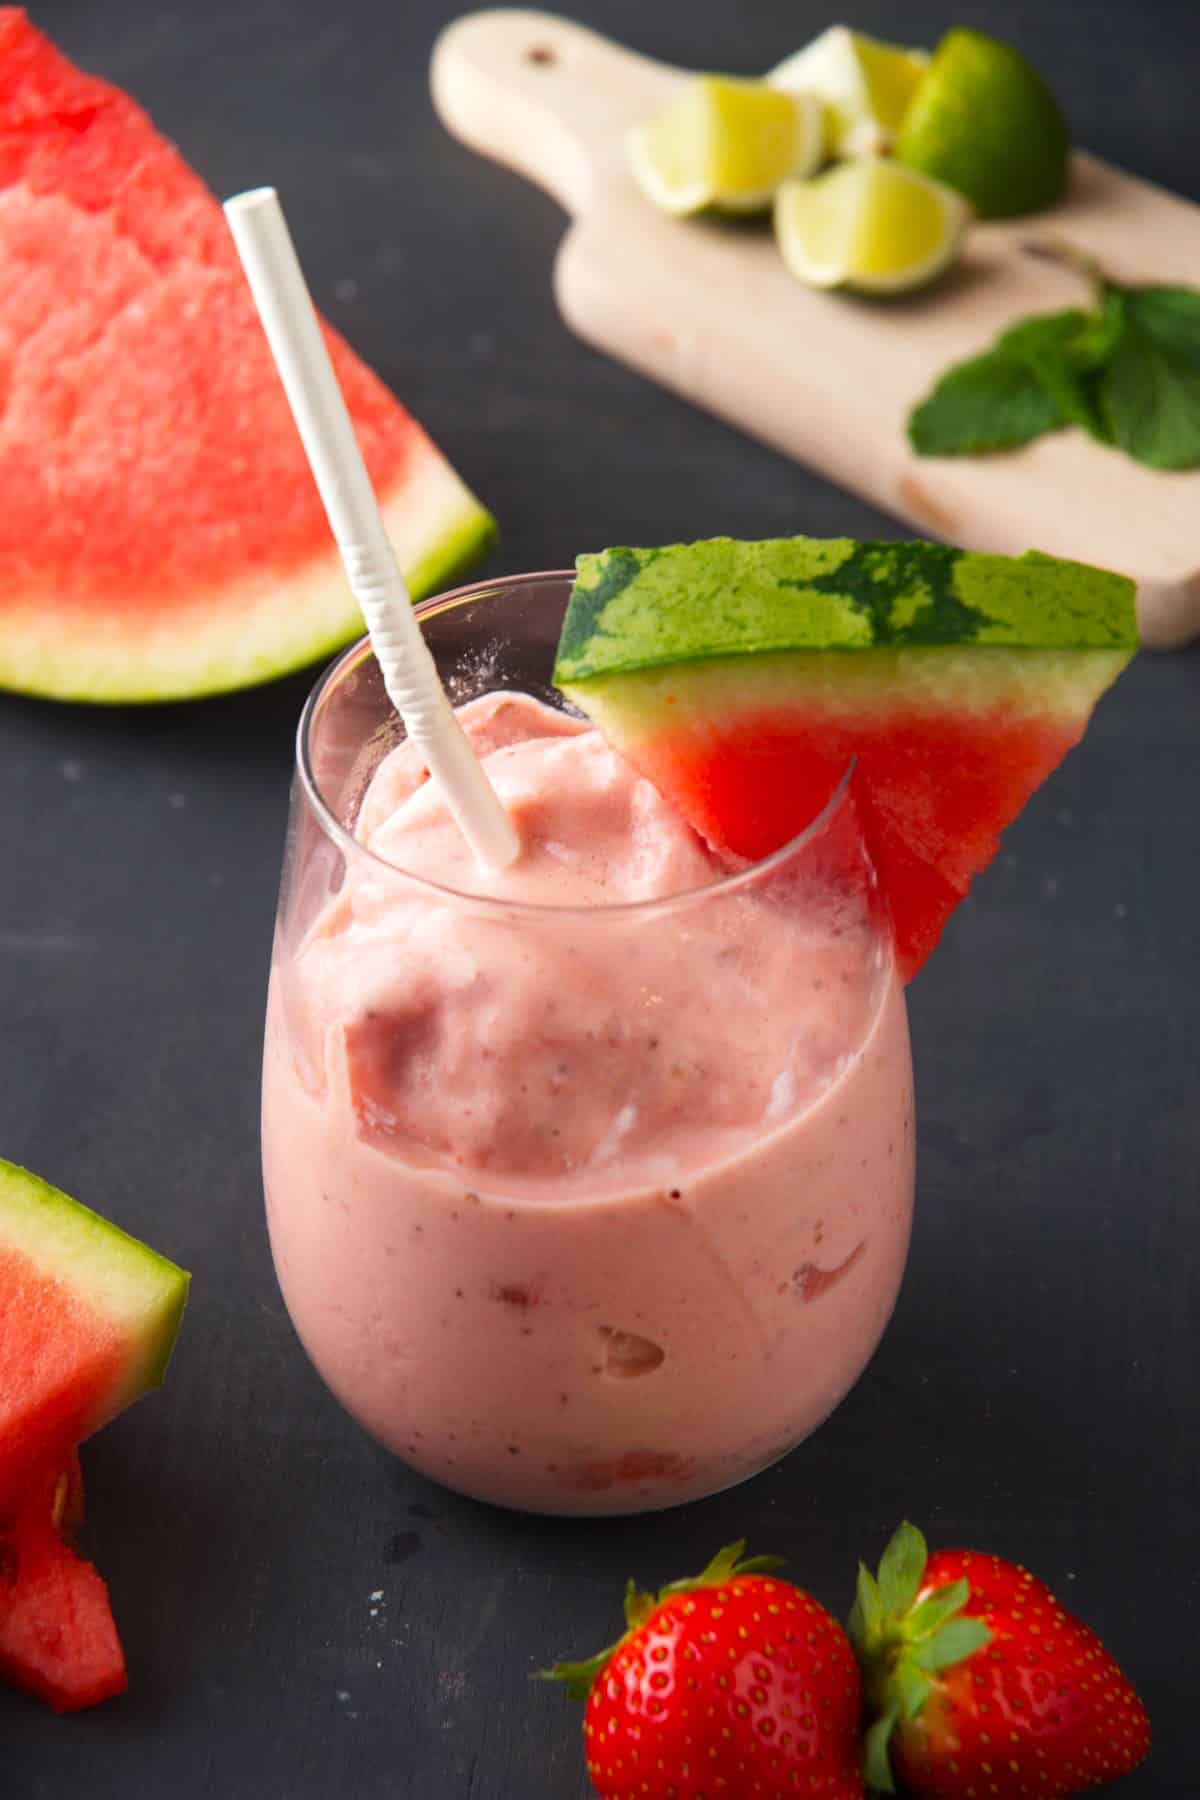 Watermelon smoothie with fresh watermelon wedge and paper straw in glass.